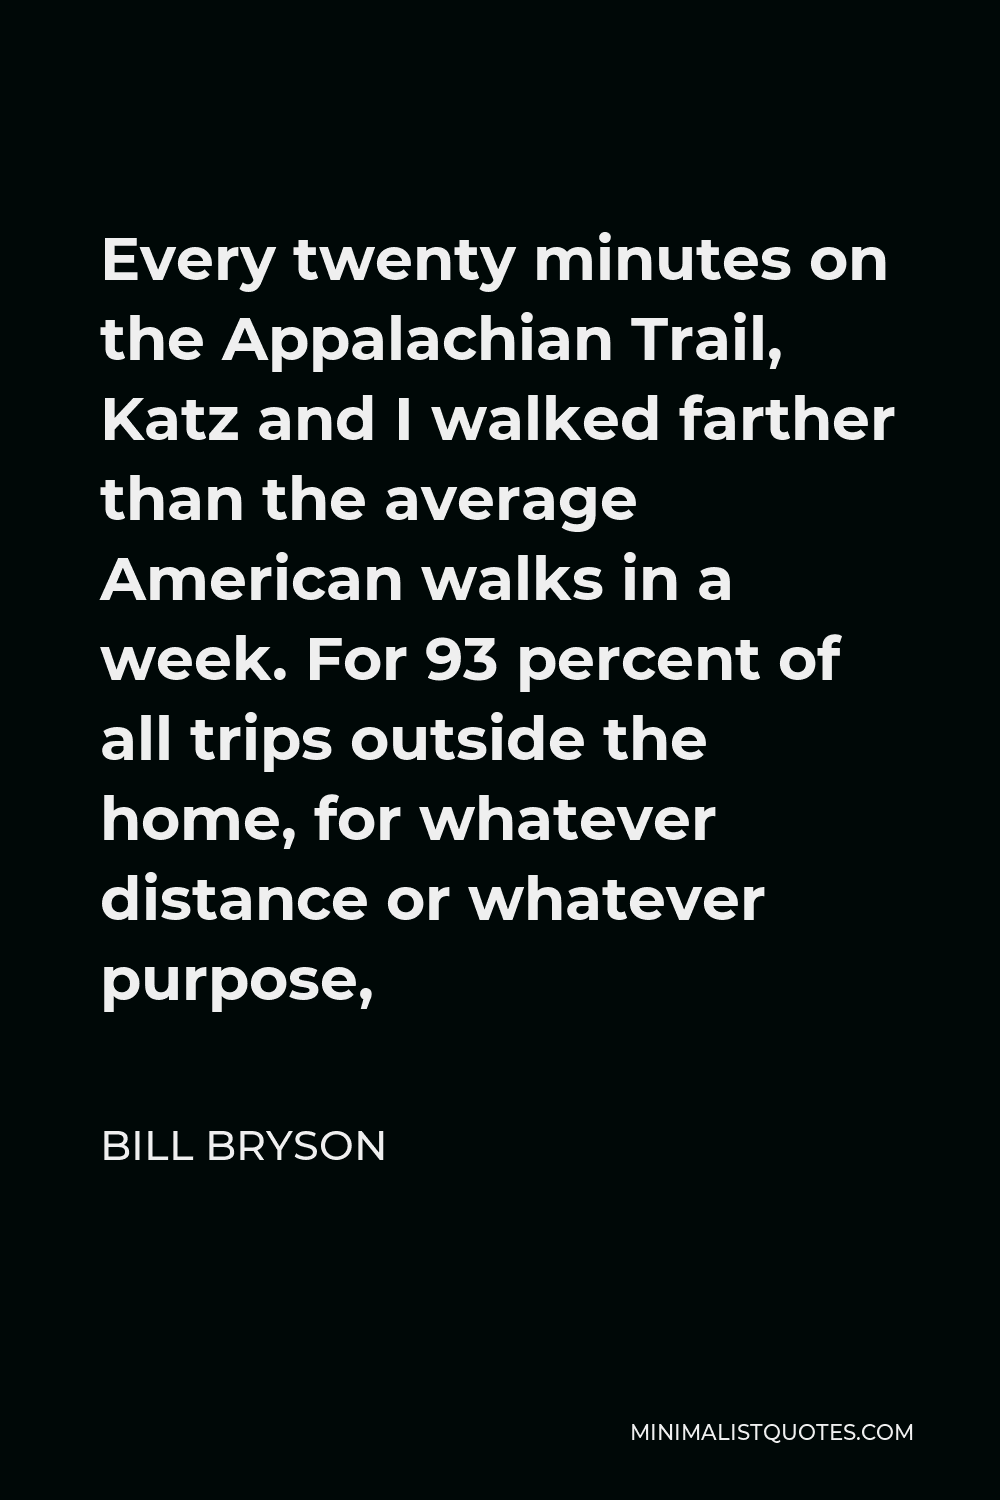 Bill Bryson Quote - Every twenty minutes on the Appalachian Trail, Katz and I walked farther than the average American walks in a week. For 93 percent of all trips outside the home, for whatever distance or whatever purpose,